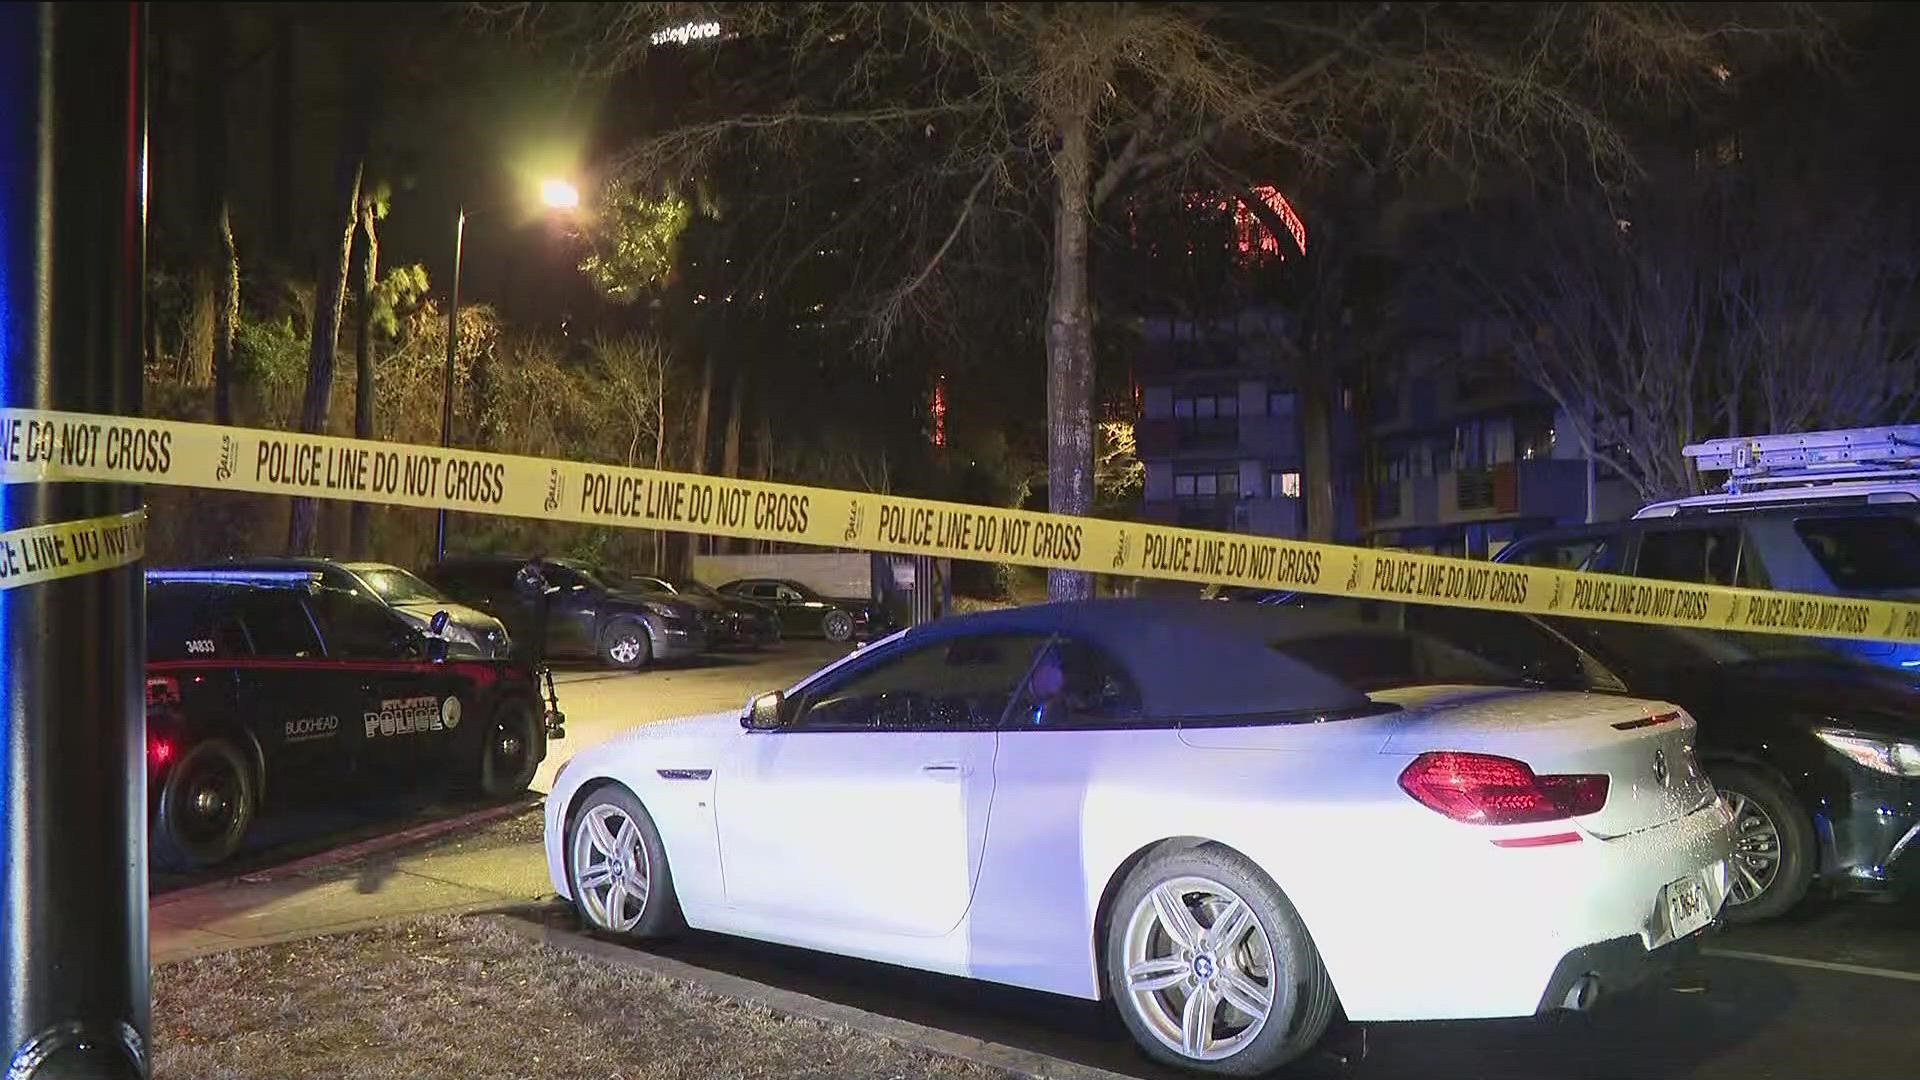 A father and son were shot early Friday morning in the parking lot of a Buckhead apartment complex, according to Atlanta Police.